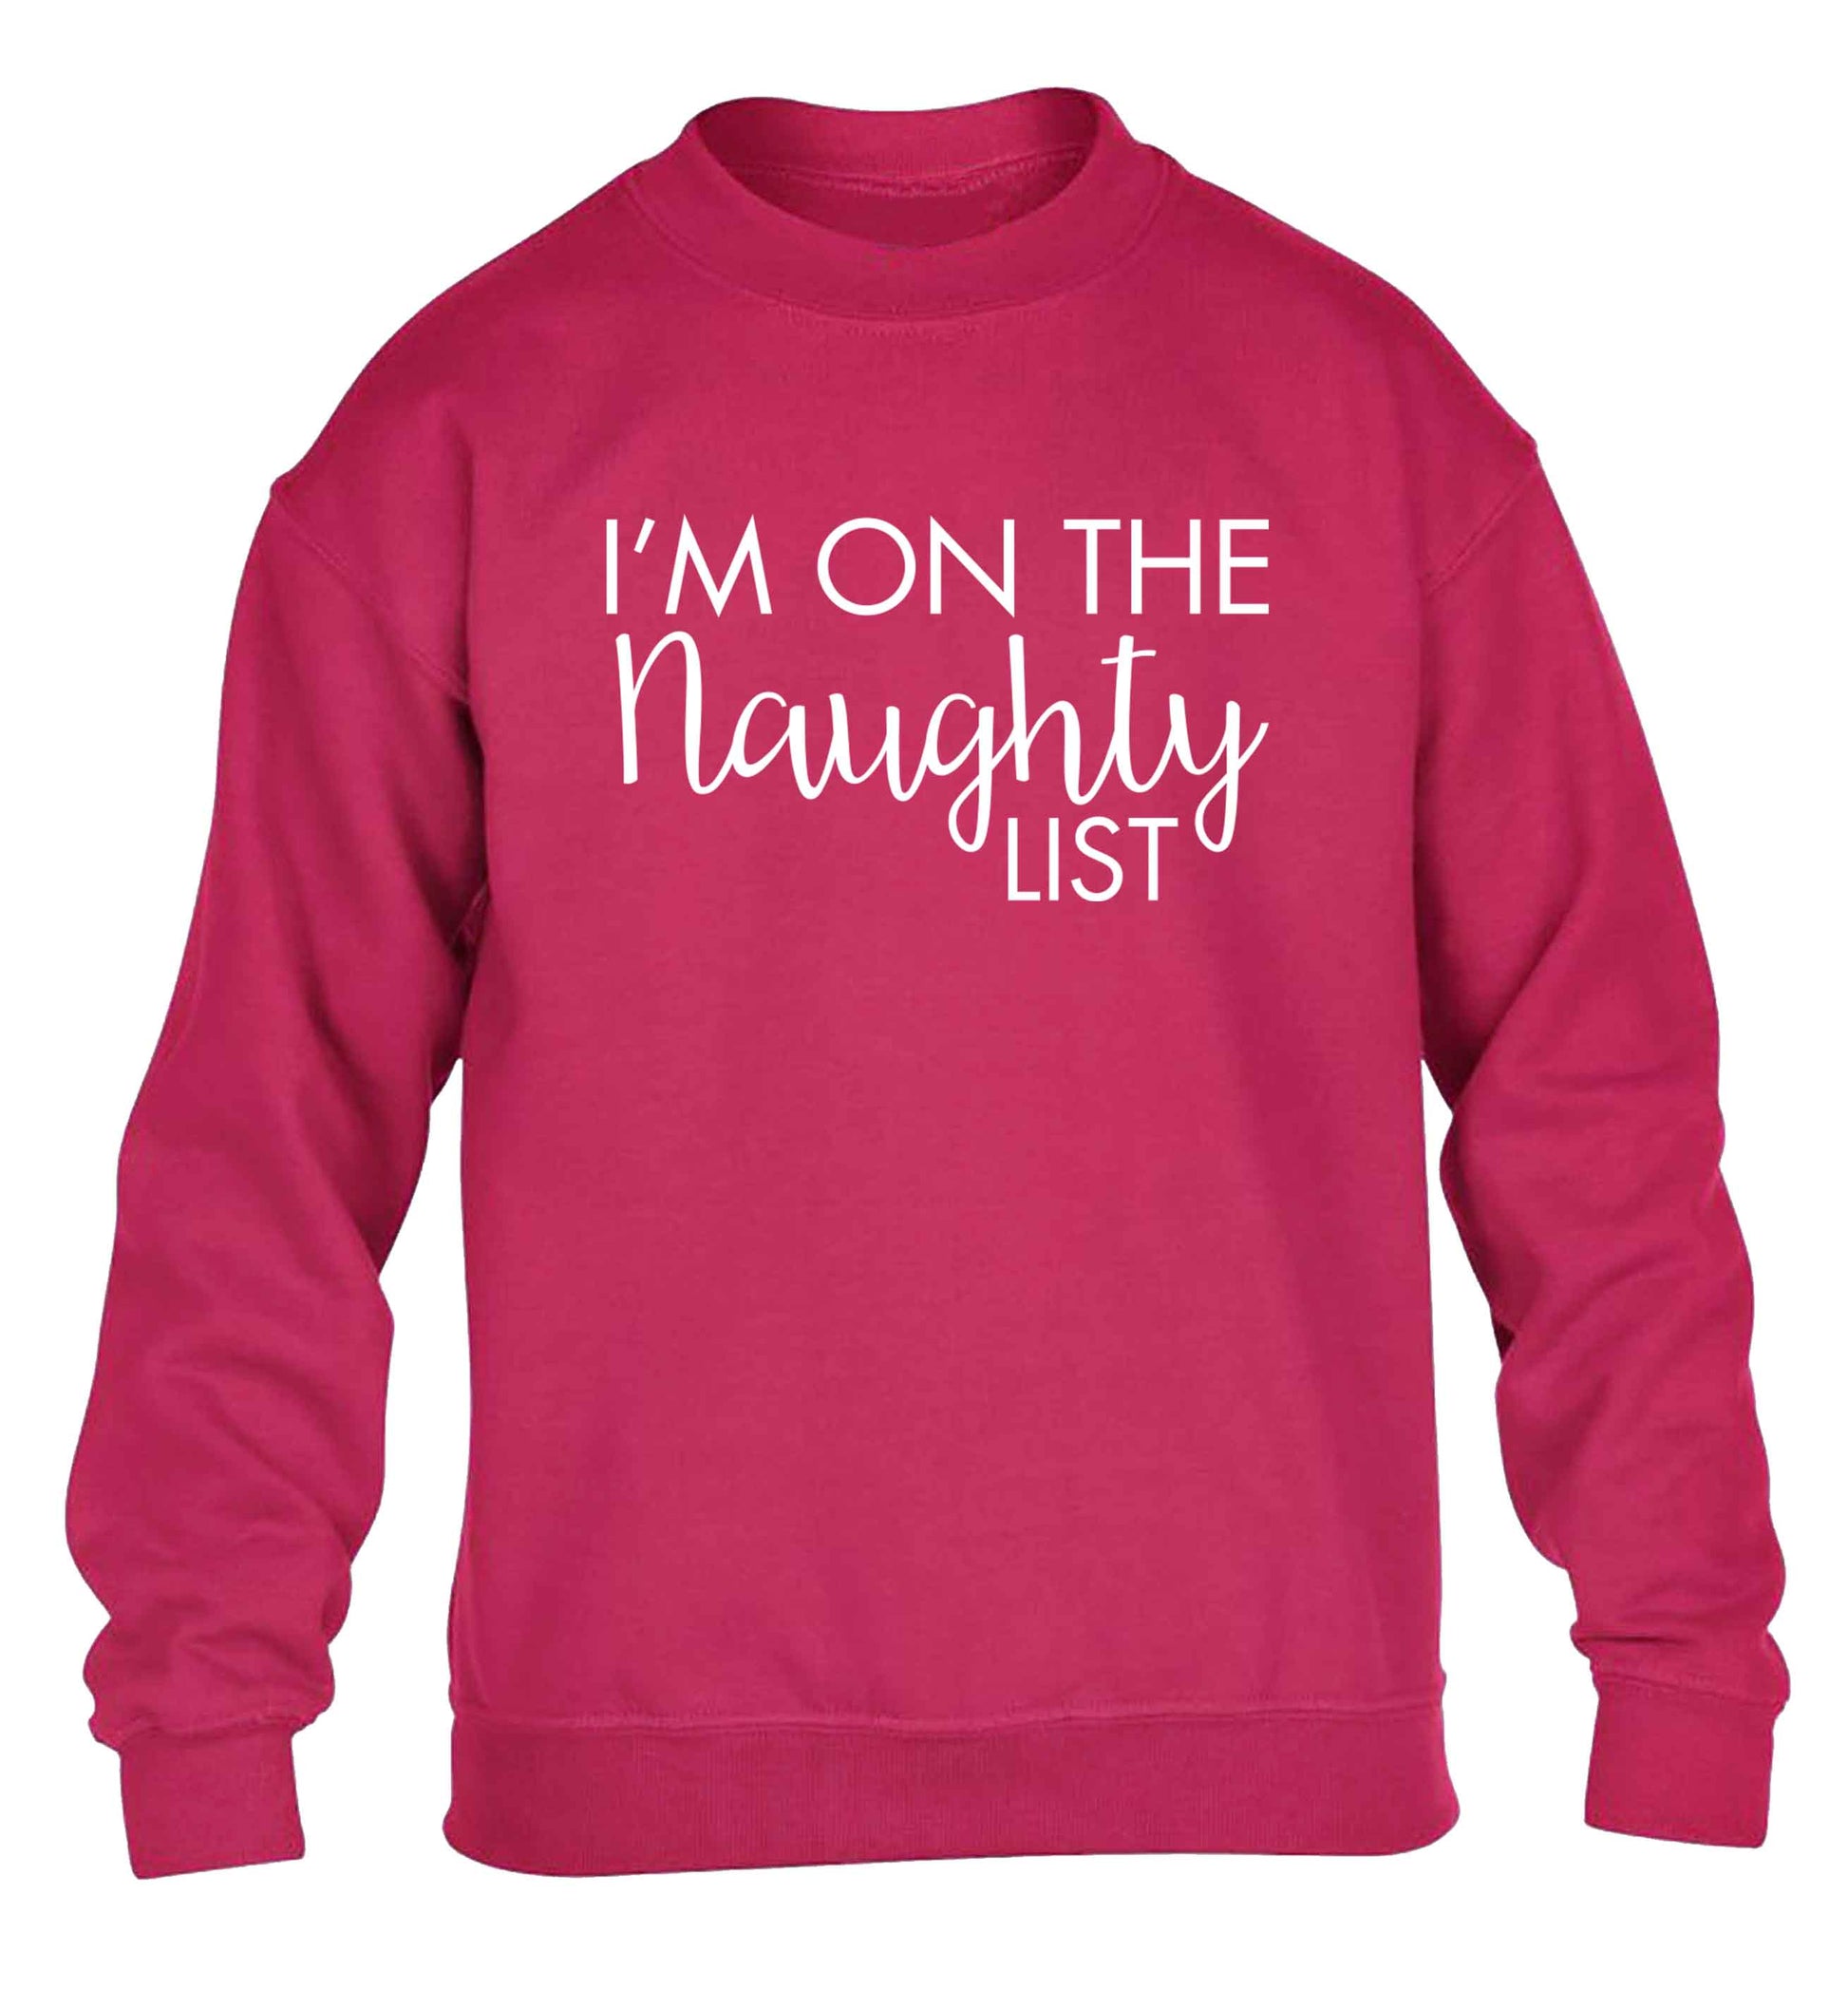 I'm on the naughty list children's pink sweater 12-13 Years